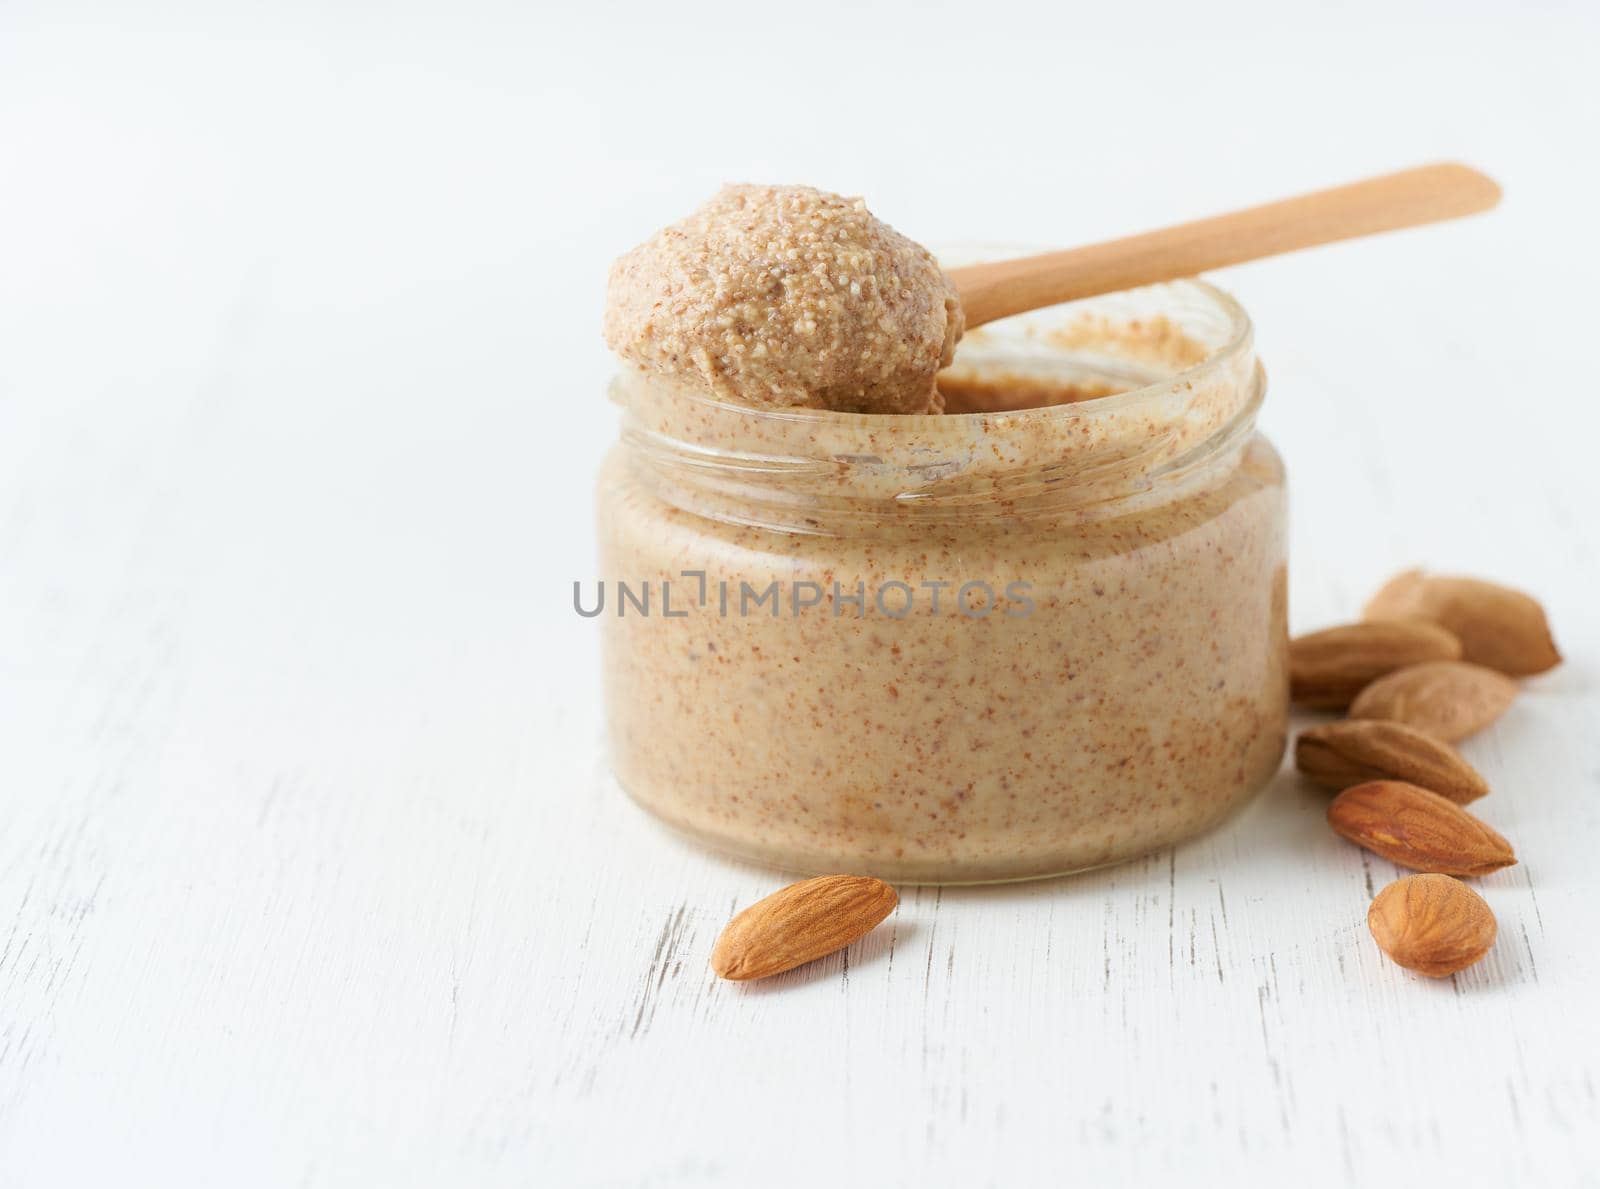 Almond butter, raw food paste made from grinding almonds into nut butter, crunchy and stir, white wooden table, glass jar, side view, close up, copy space